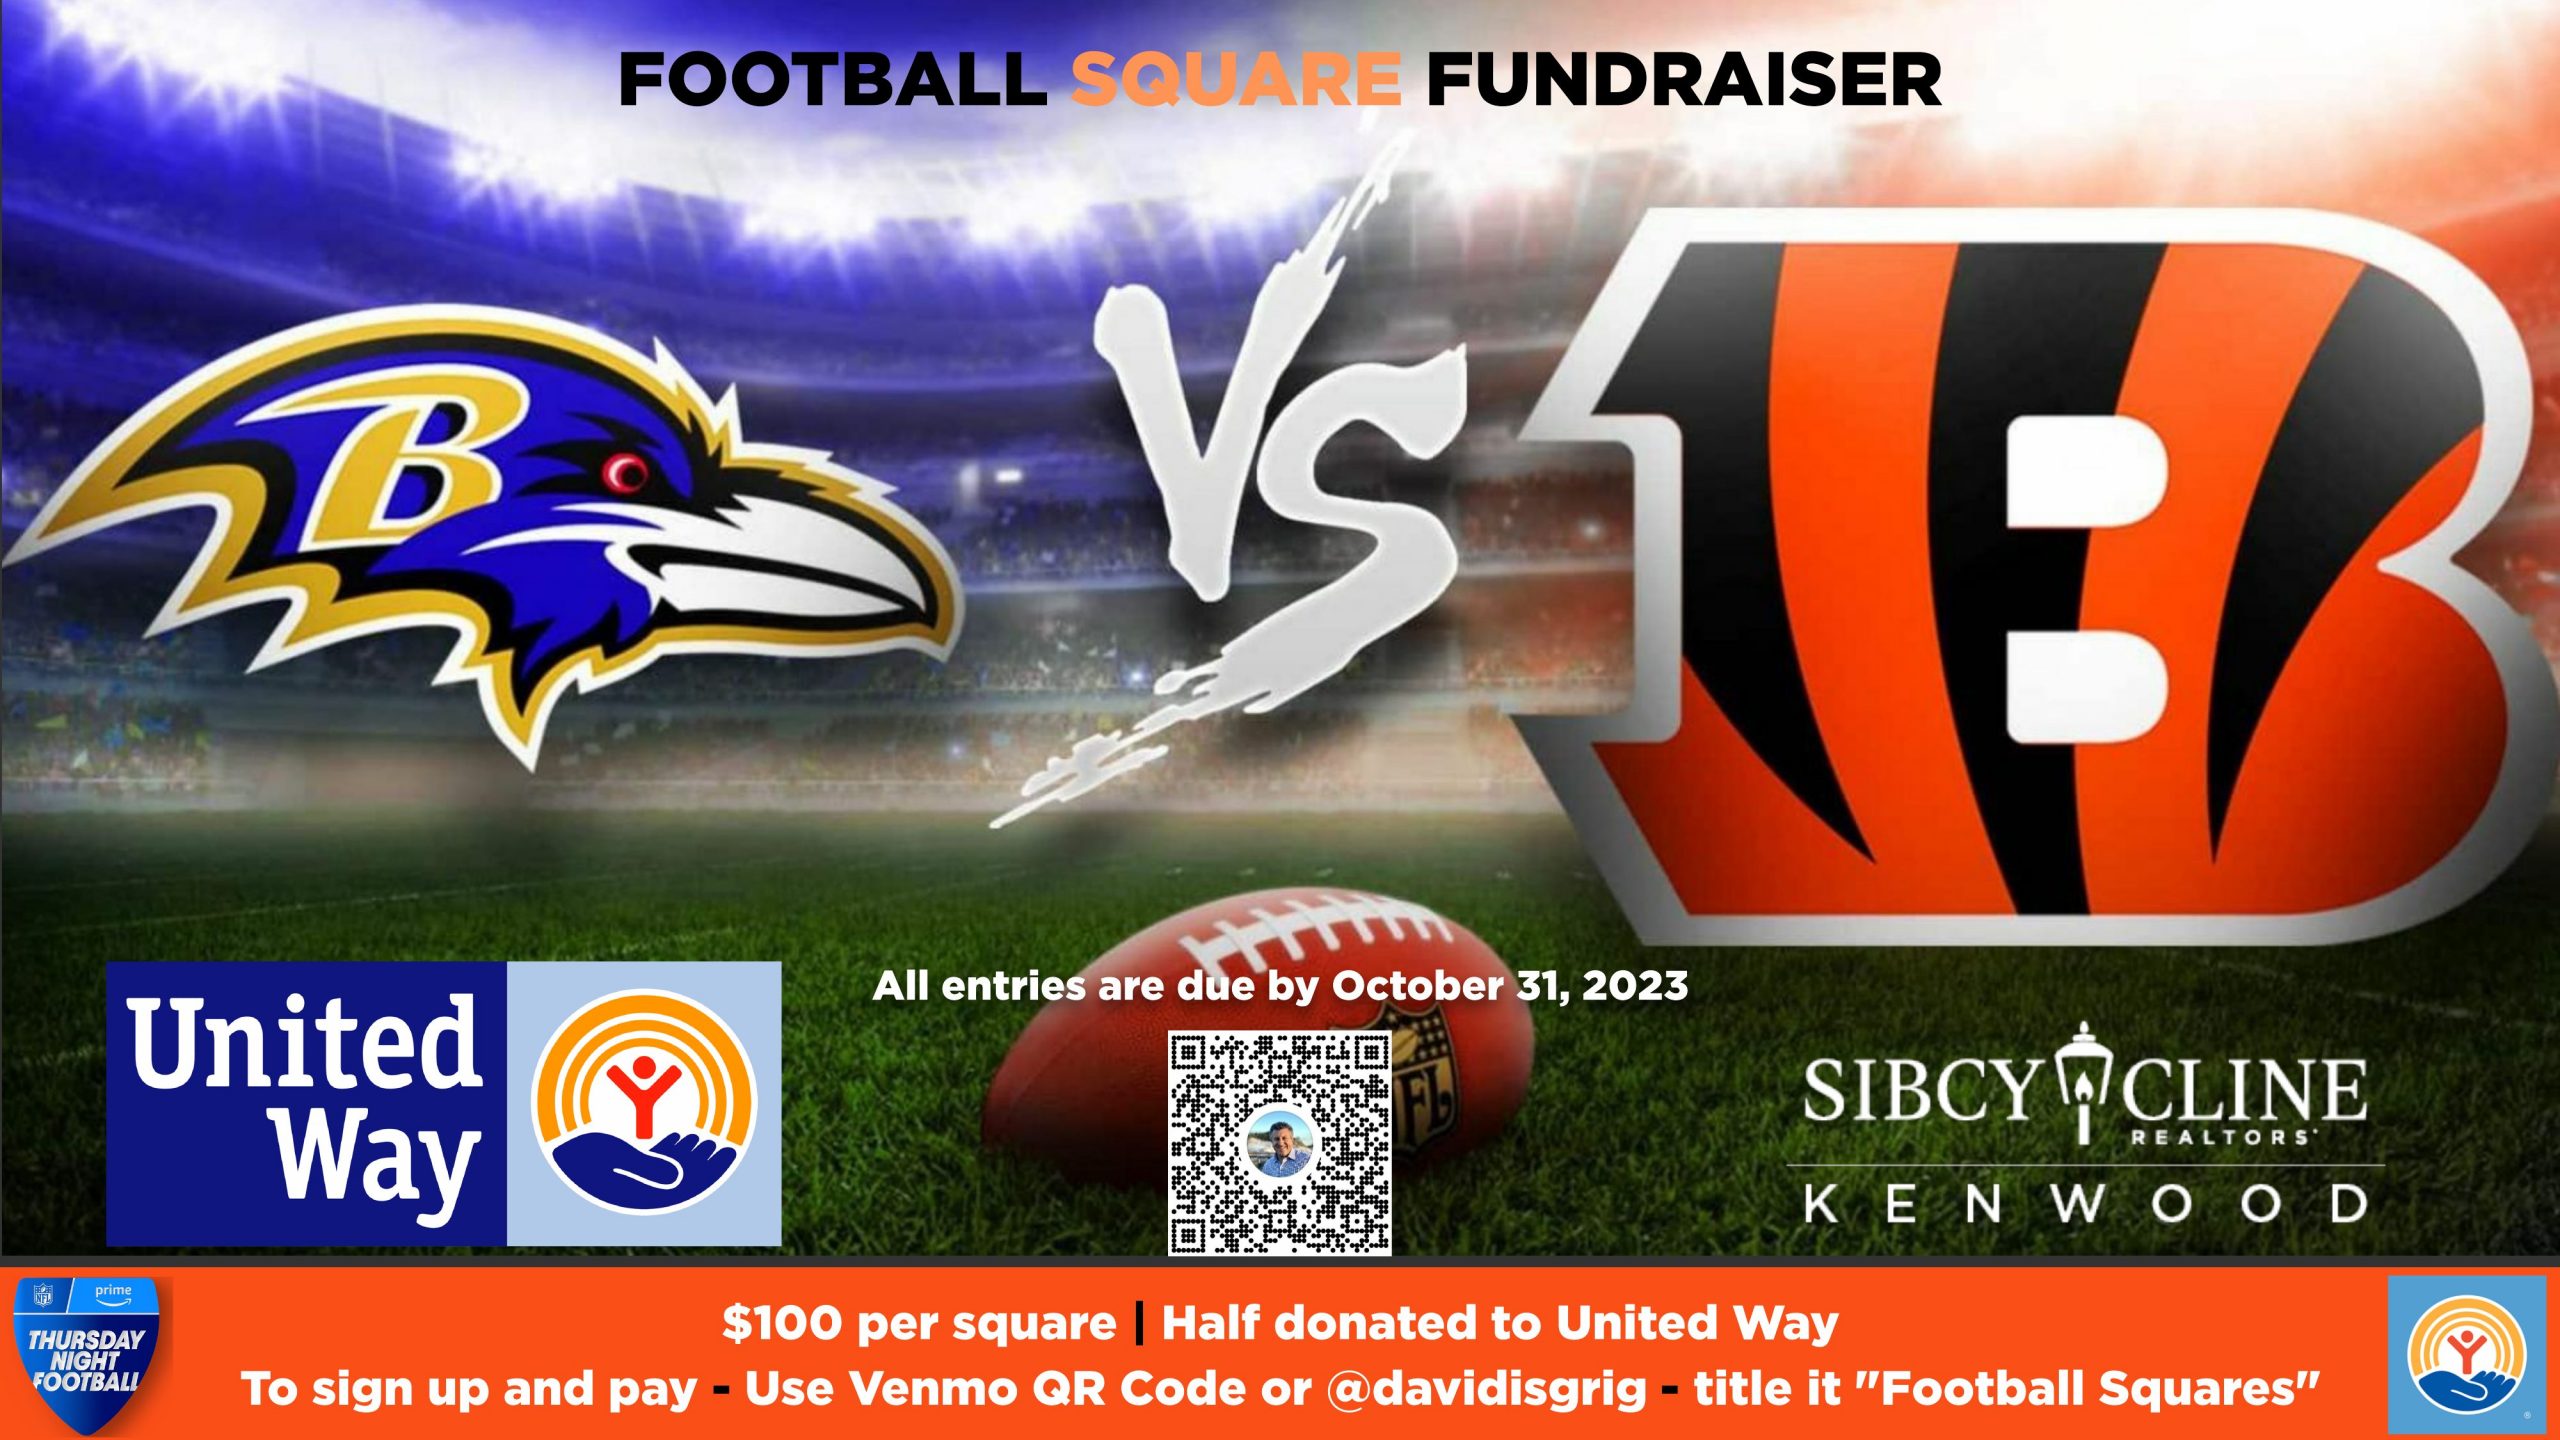 UW Football Square Fundraiser - Untitled Page